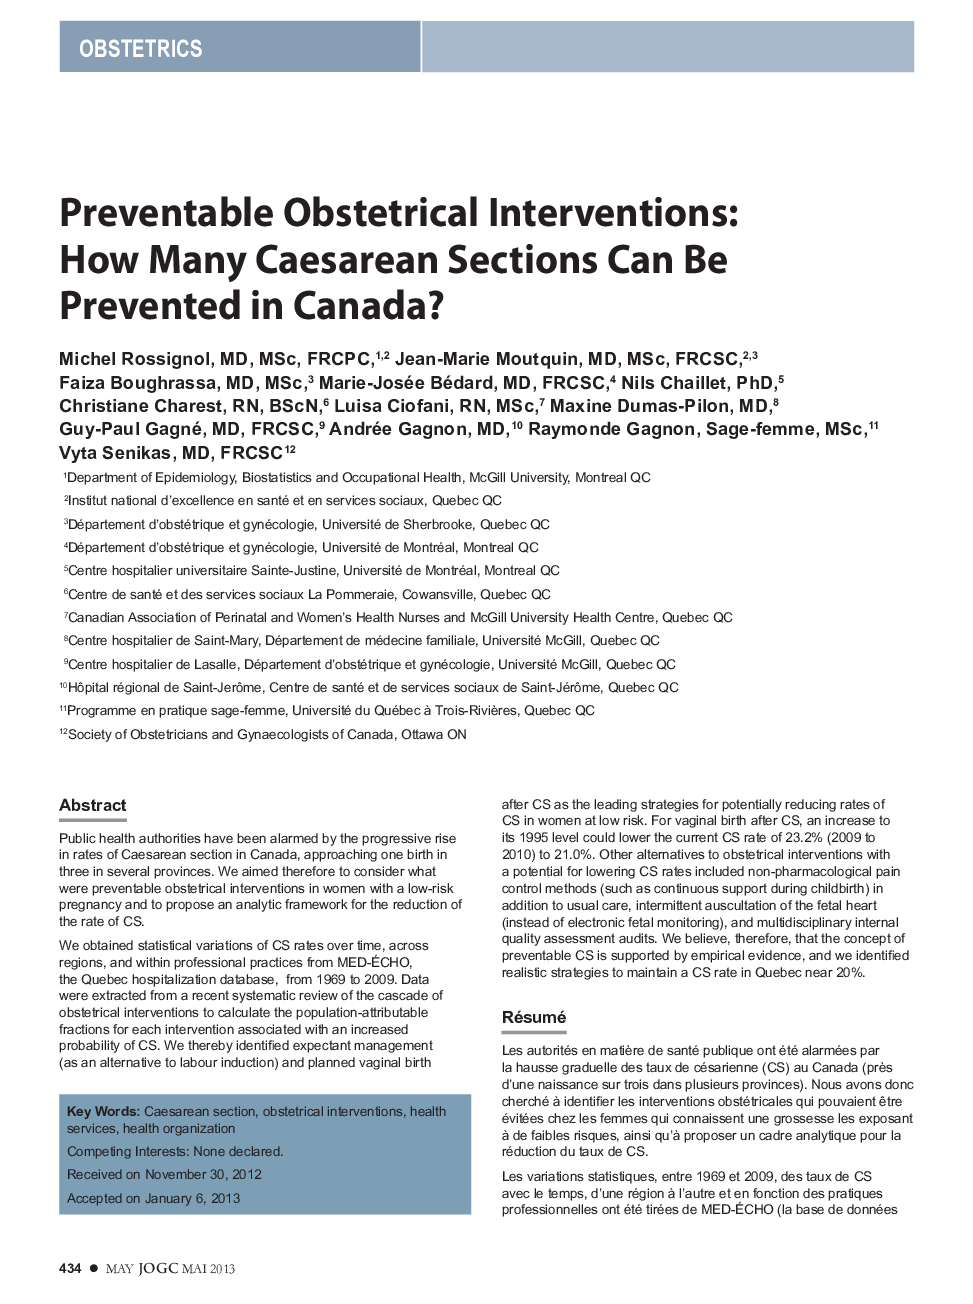 Preventable Obstetrical Interventions: How Many Caesarean Sections Can Be Prevented in Canada?